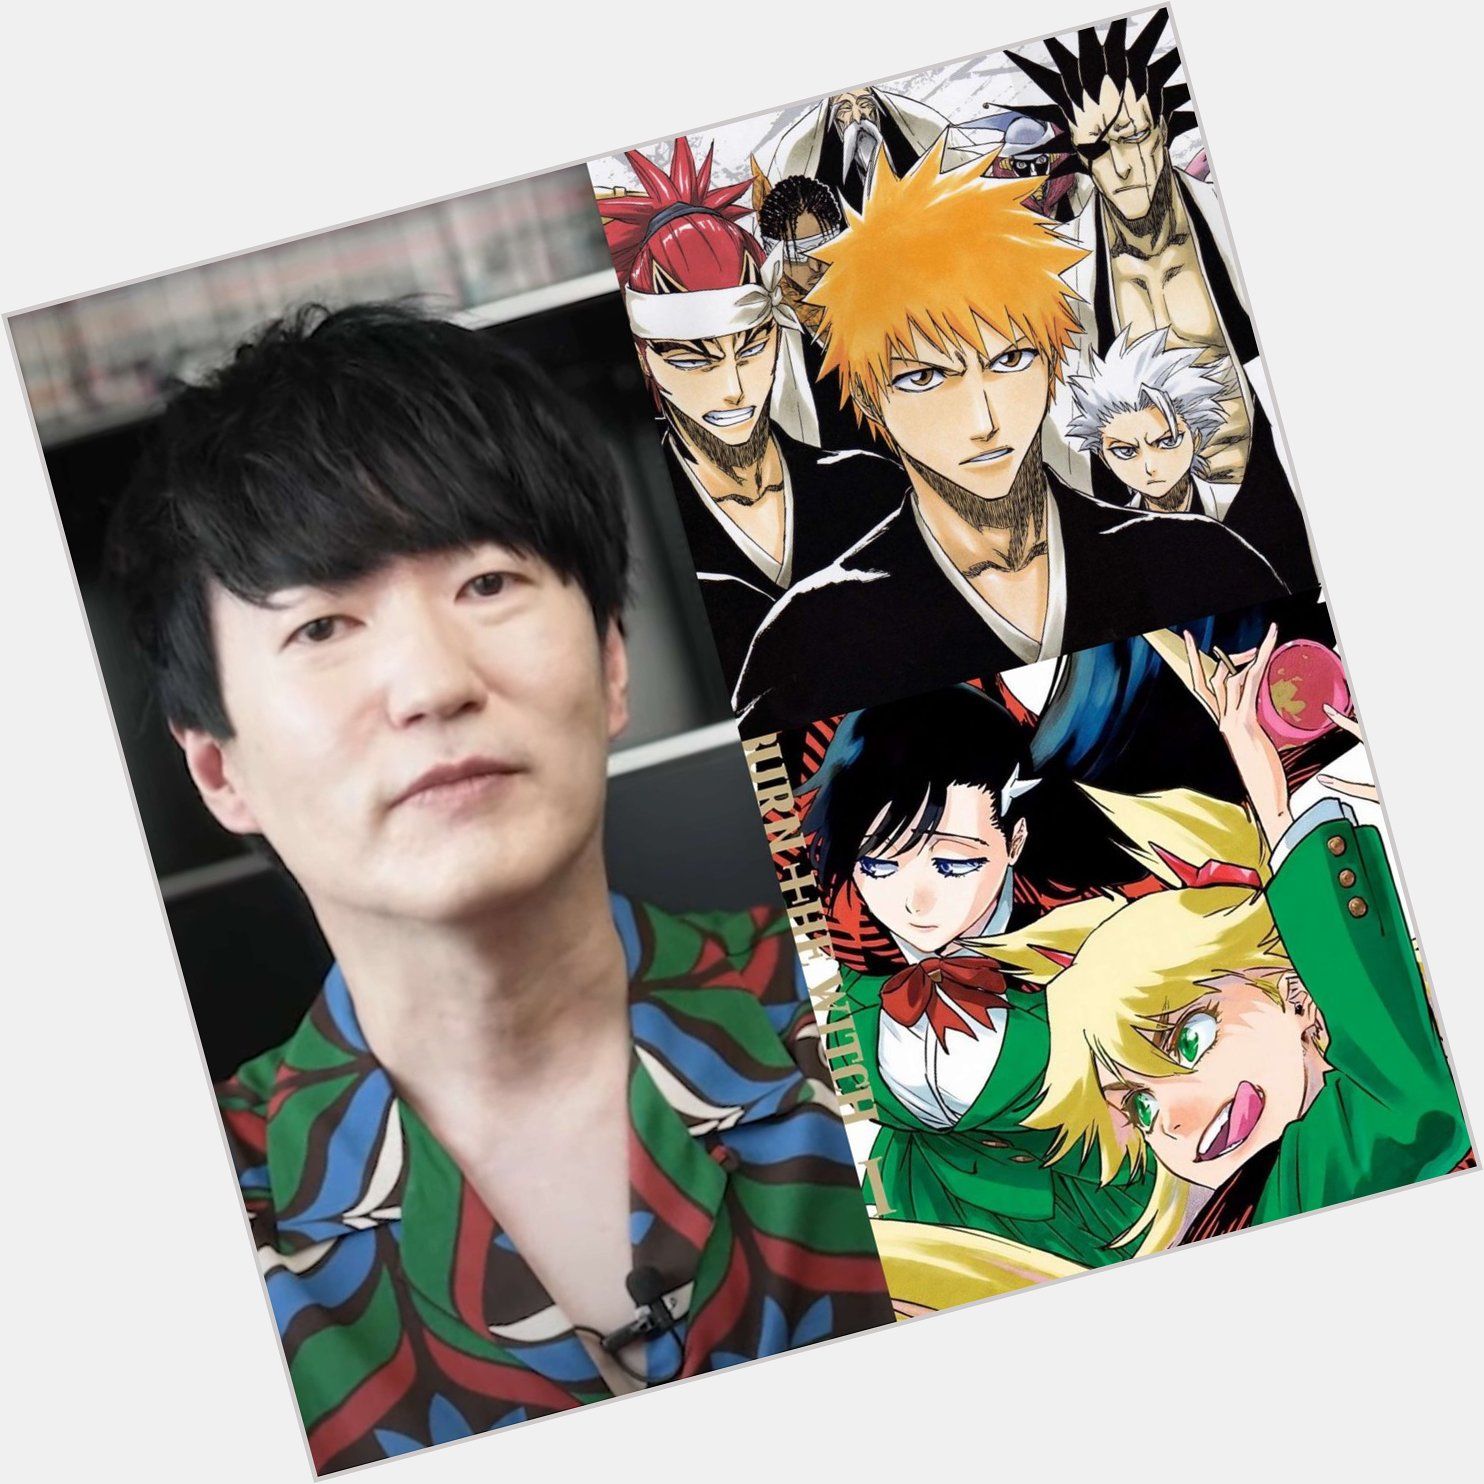  Happy Birthday to Tite Kubo, the creator of BLEACH and Burn the Witch! The mangaka turned 46!   